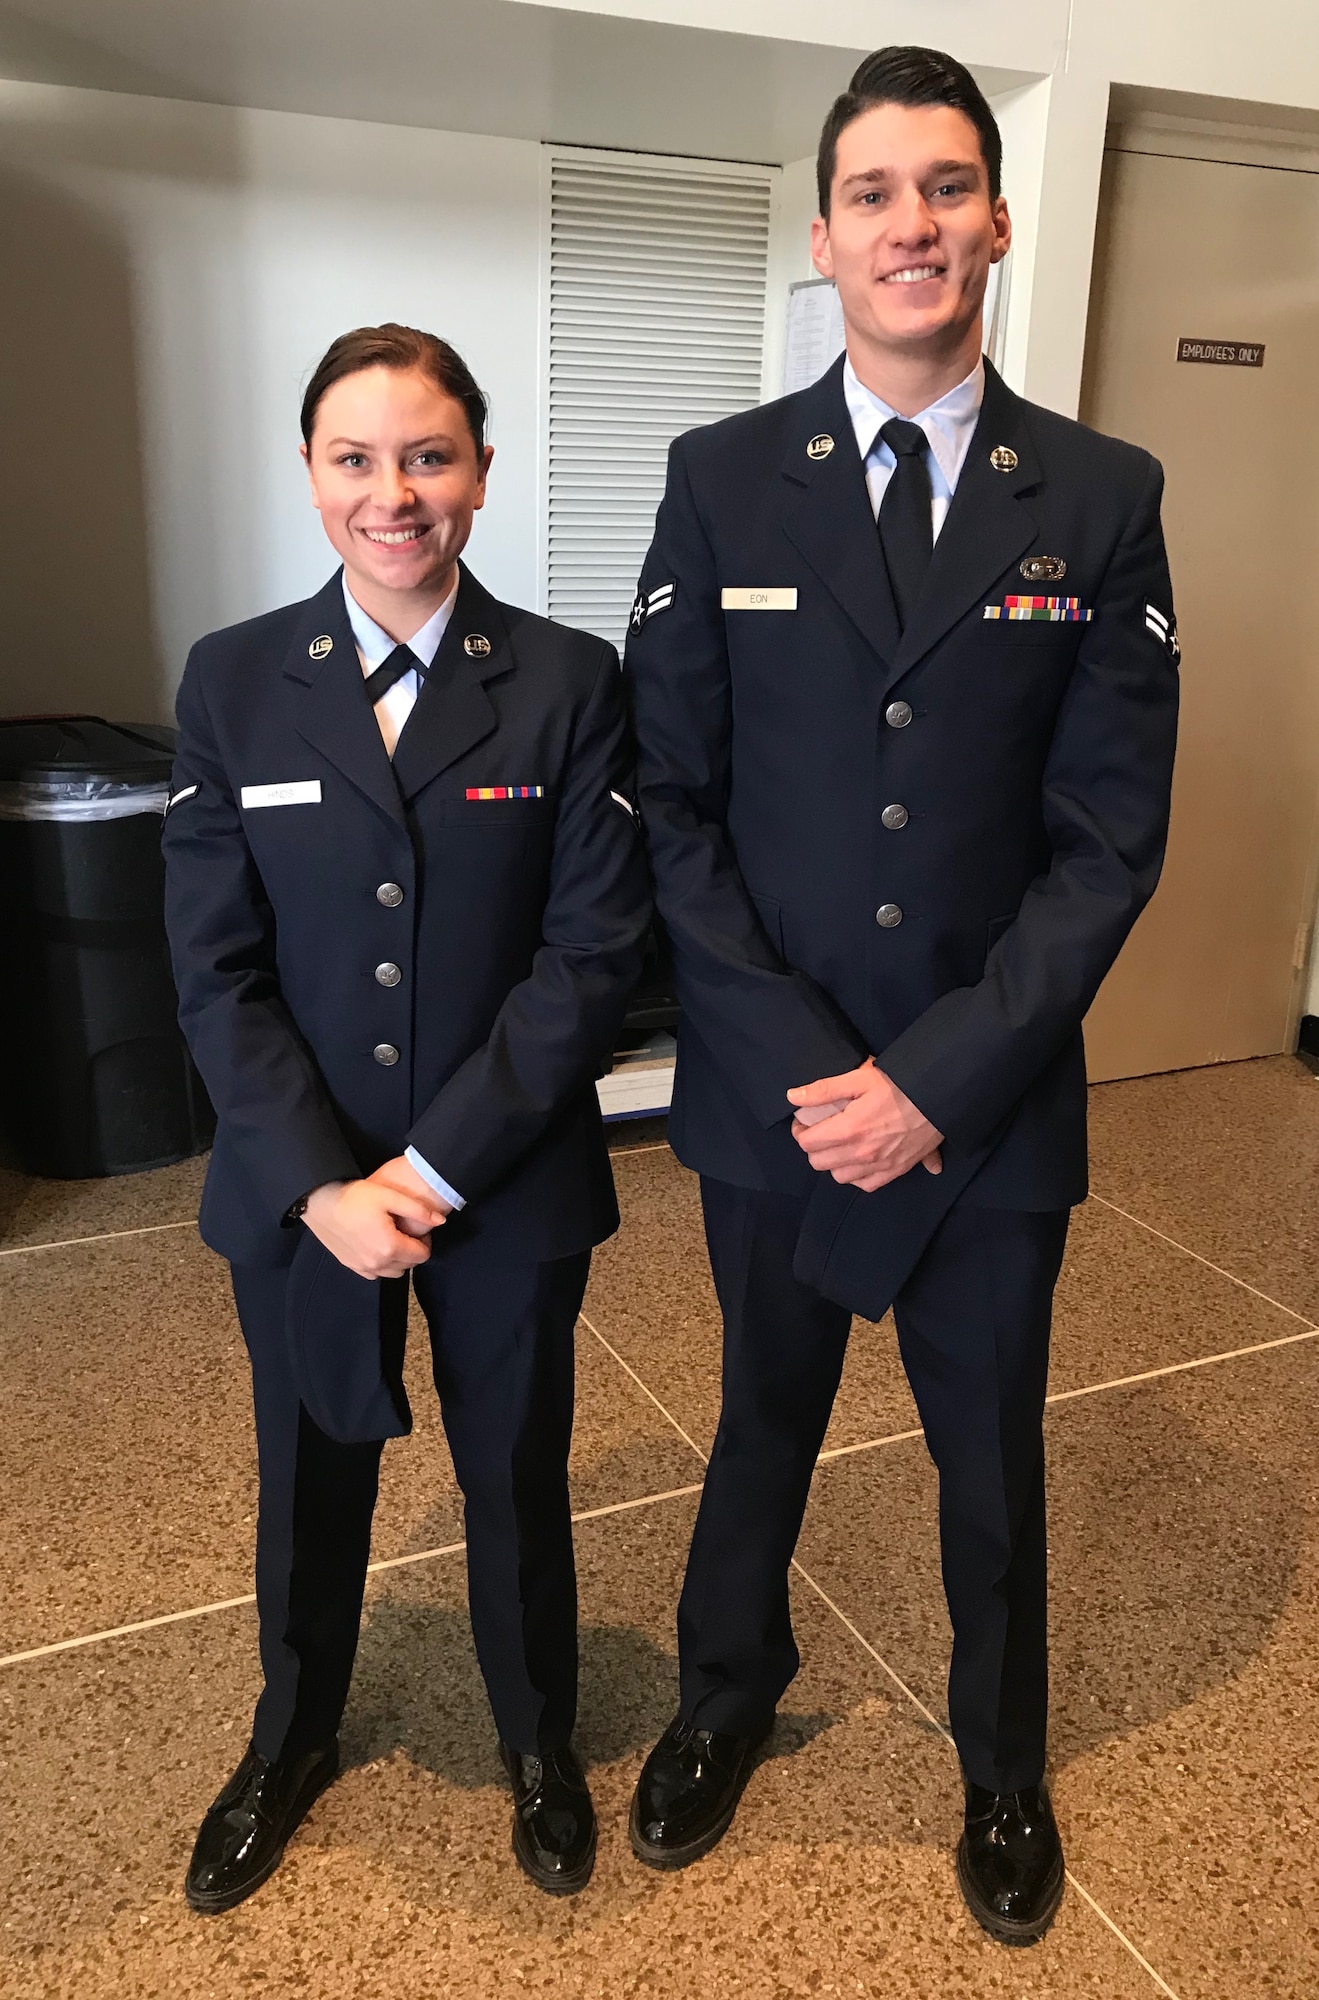 Airman 1st Class Alex Eon, 315th Training Squadron trainee, and Airman Kaycie Hinds, 315th Training Squadron trainee, capture the moment prior to graduating technical school training at Goodfellow Air Force Base, San Angelo, Texas Dec. 21, 2017. Although this photo was taken prior to their wedding in September 2018, Kaycie and Alex are now getting accustomed to a dual military marriage life.